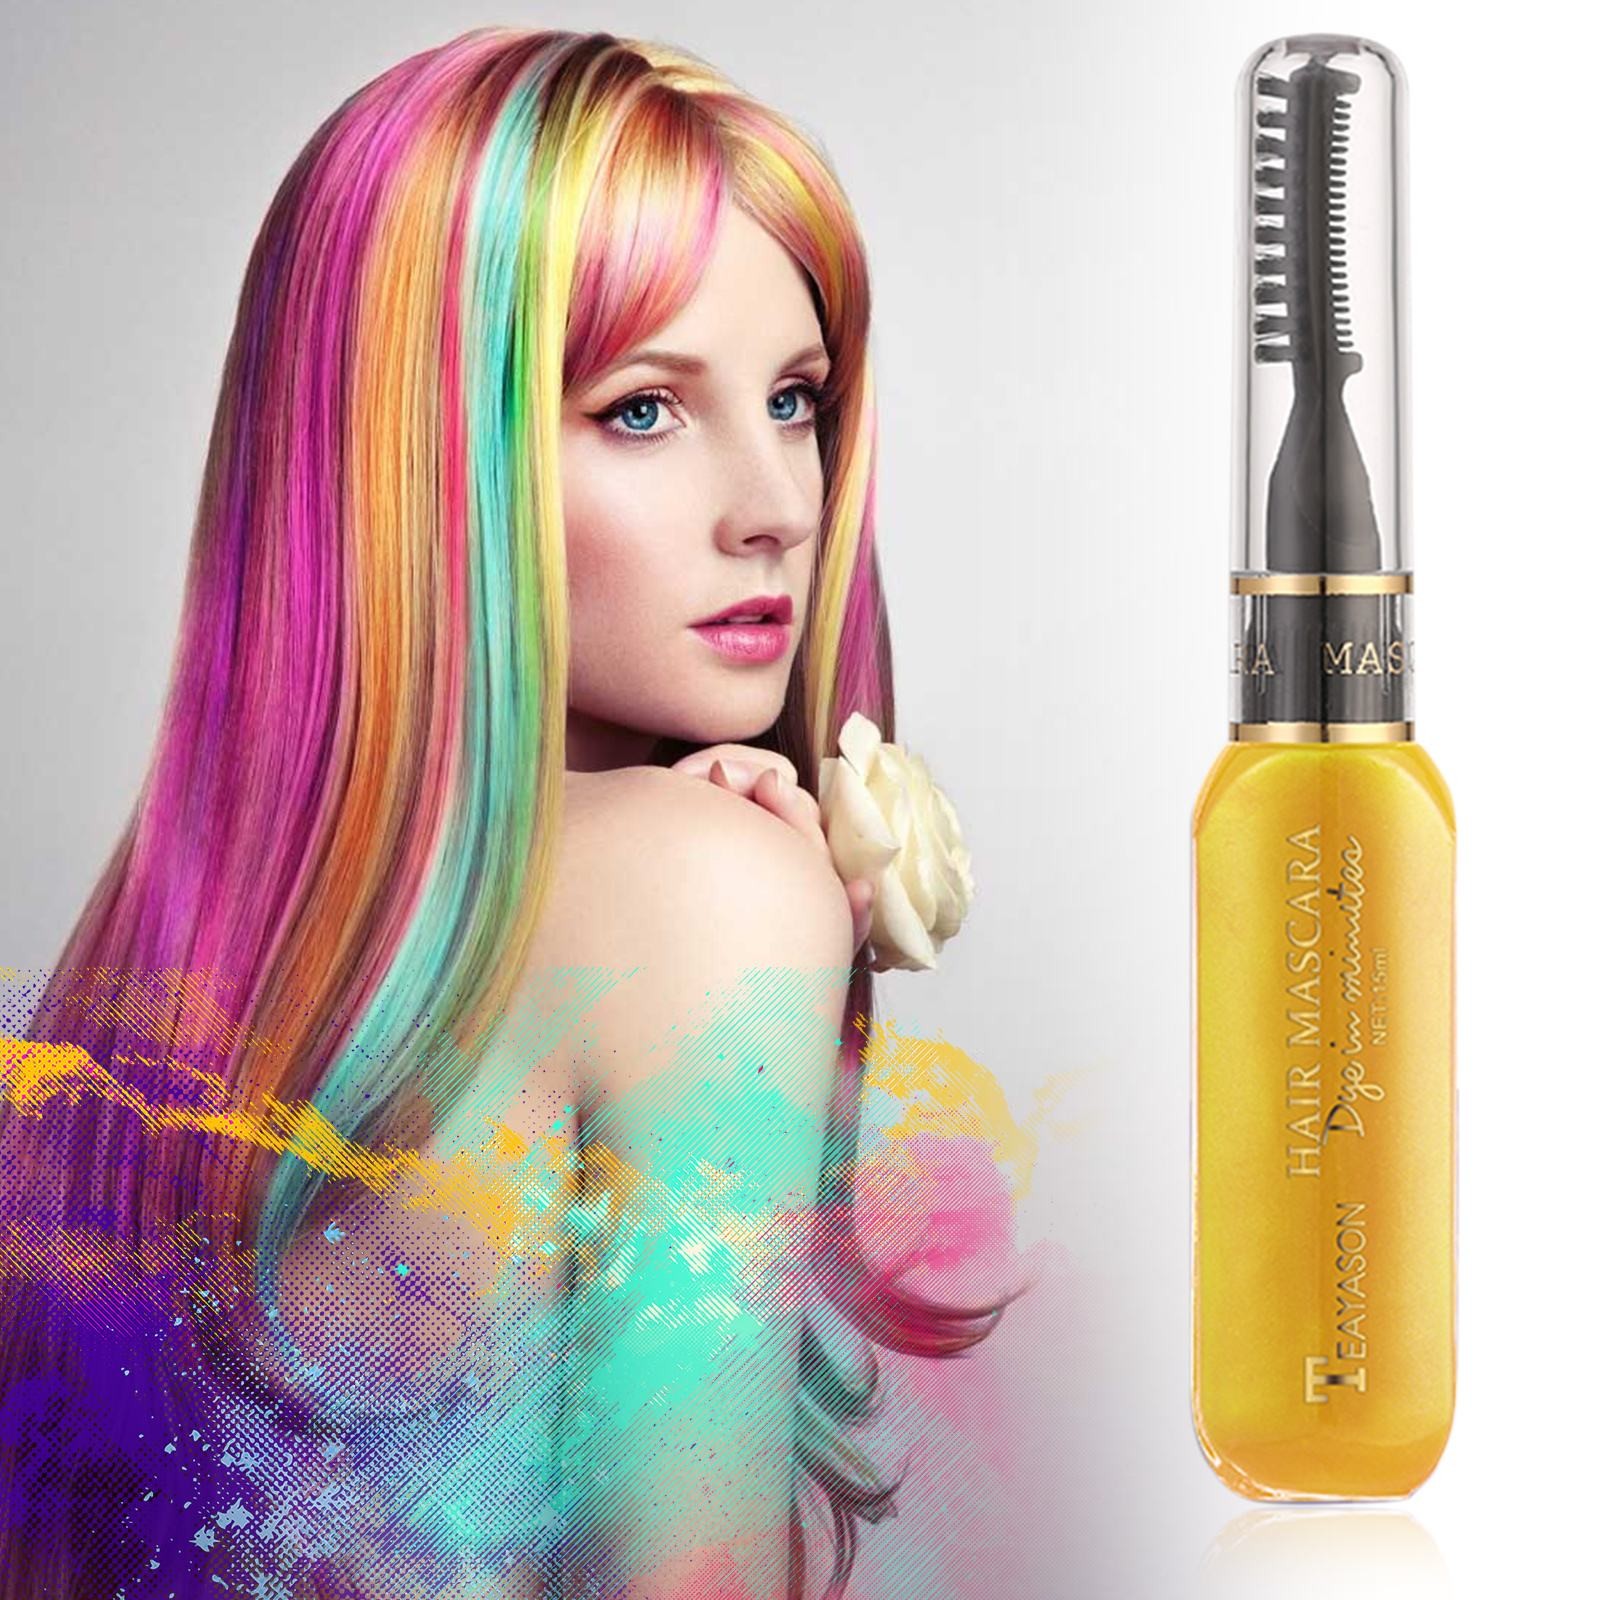 HSMQHJWE 4c Hair Care Kit Disposable Hair Color Temporary Hair Color Chalk Comb Set Women Instant Hair Color Highlight Stripe Color Mascara Hair Chalk For Birthday Party 3ml And Travel Kit - image 3 of 5